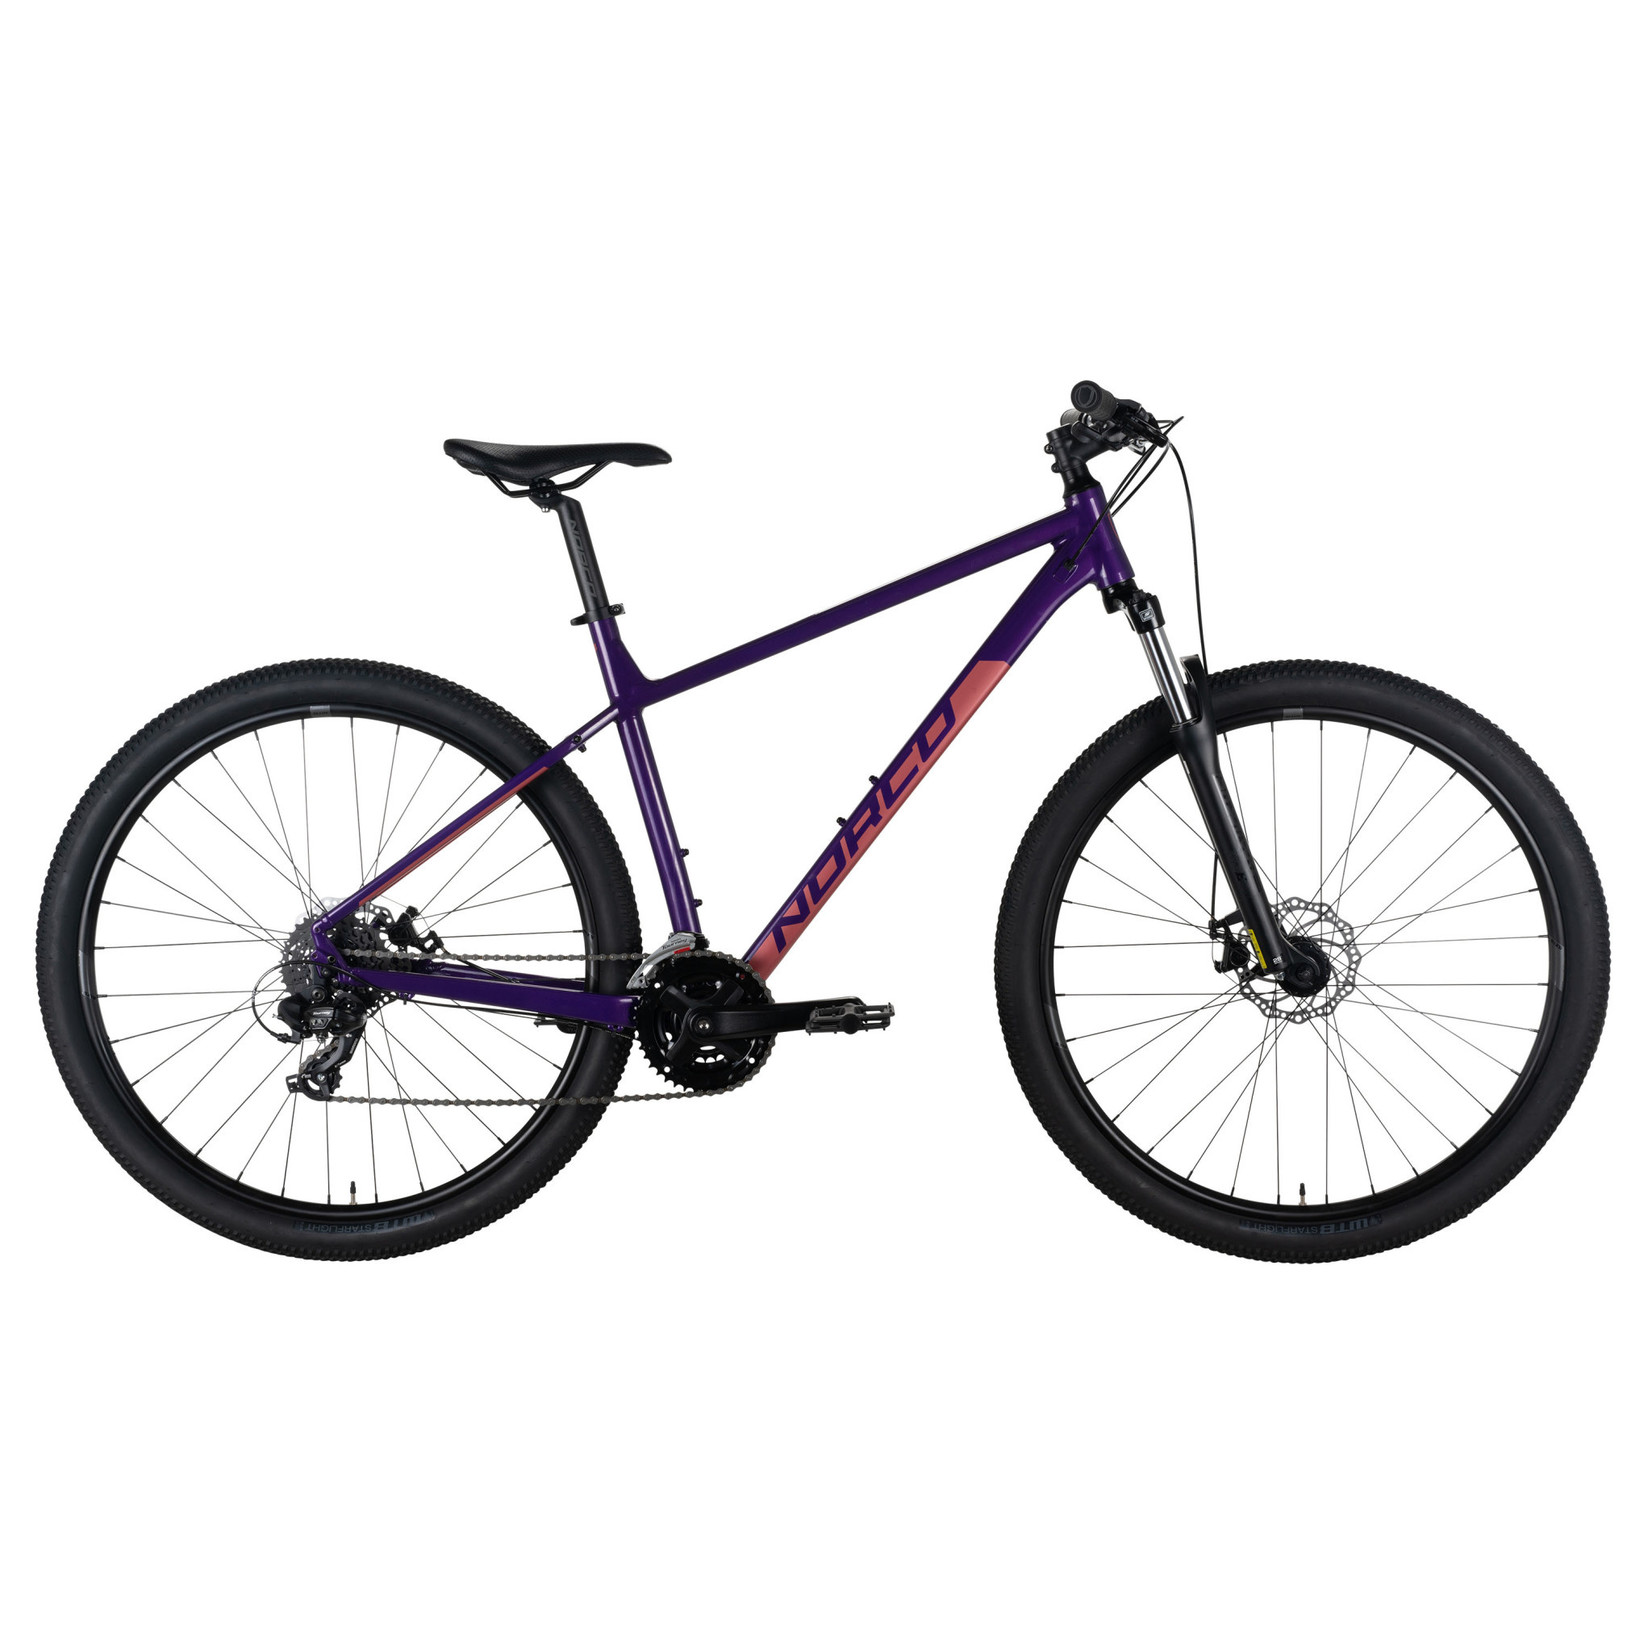 NORCO 21 STORM 5 W LG (29)- ULTRAVIOLET/PINK